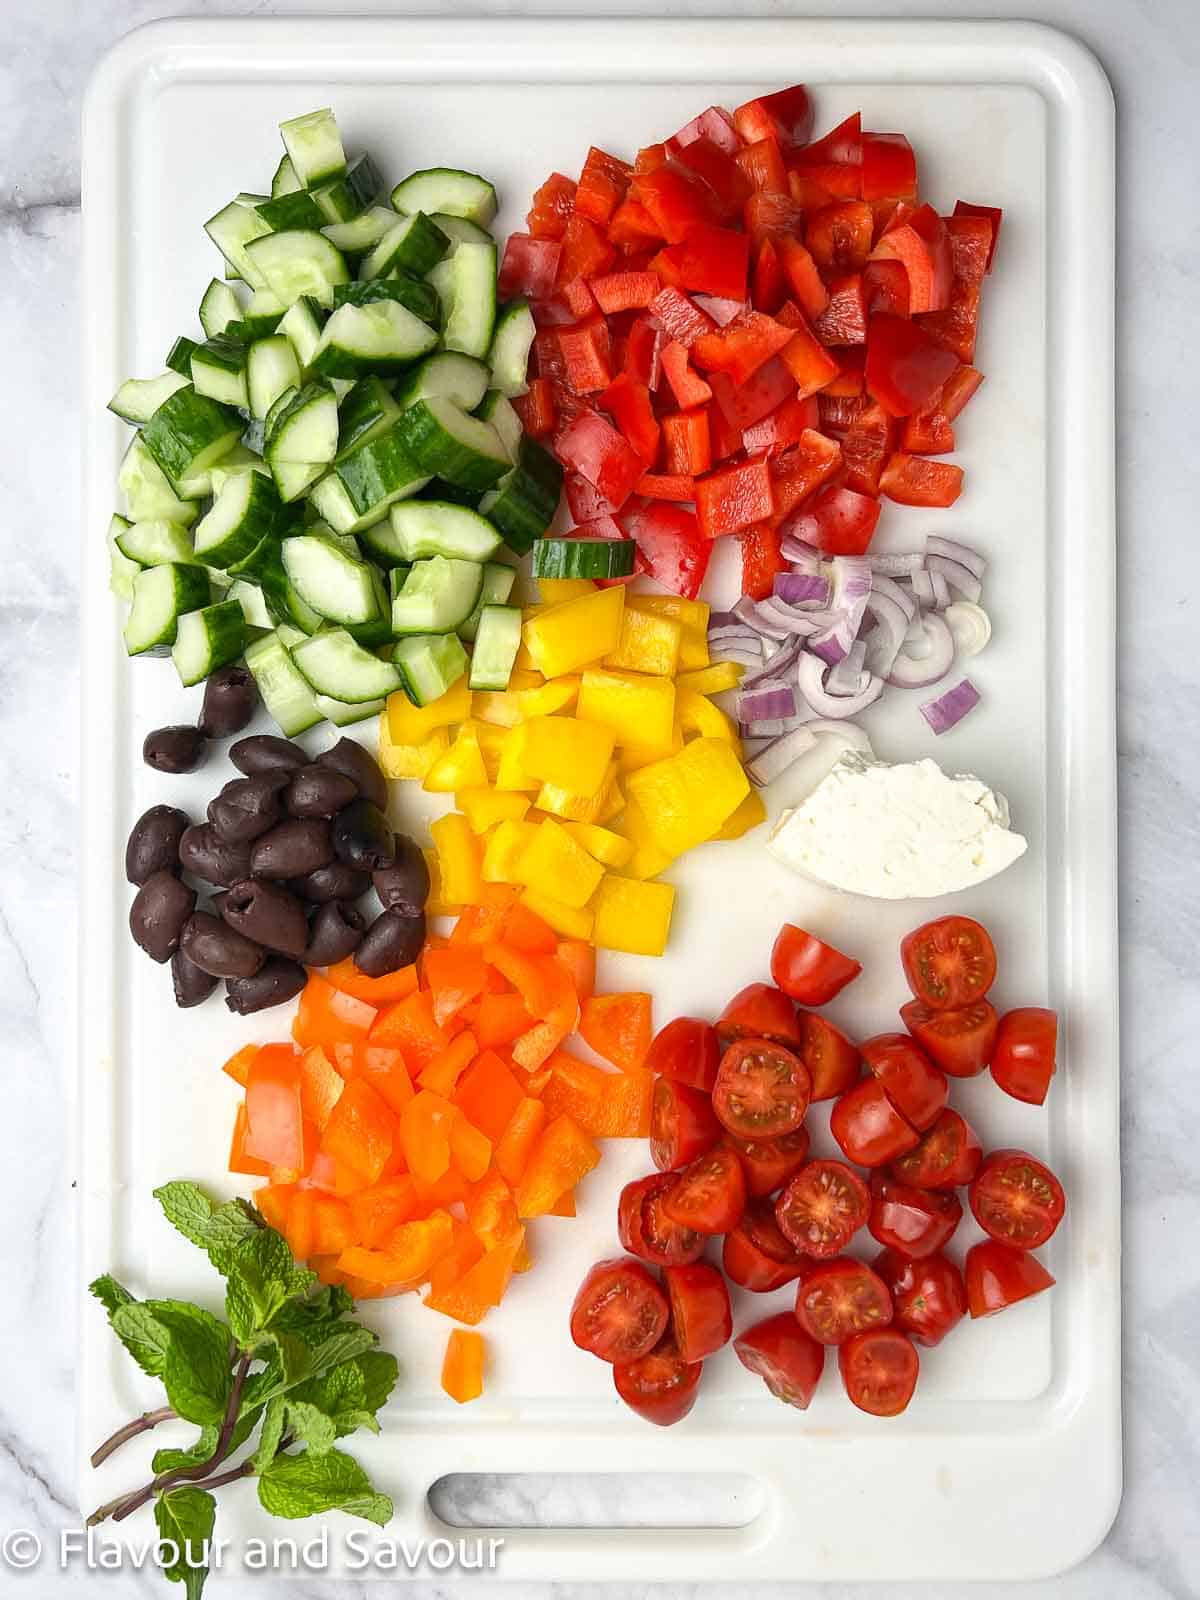 Chopped vegetables including cucumber, bell peppers, red onions, tomatoes as well as olives, feta cheese and mint leaves as ingredients for Greek Chicken Salad.